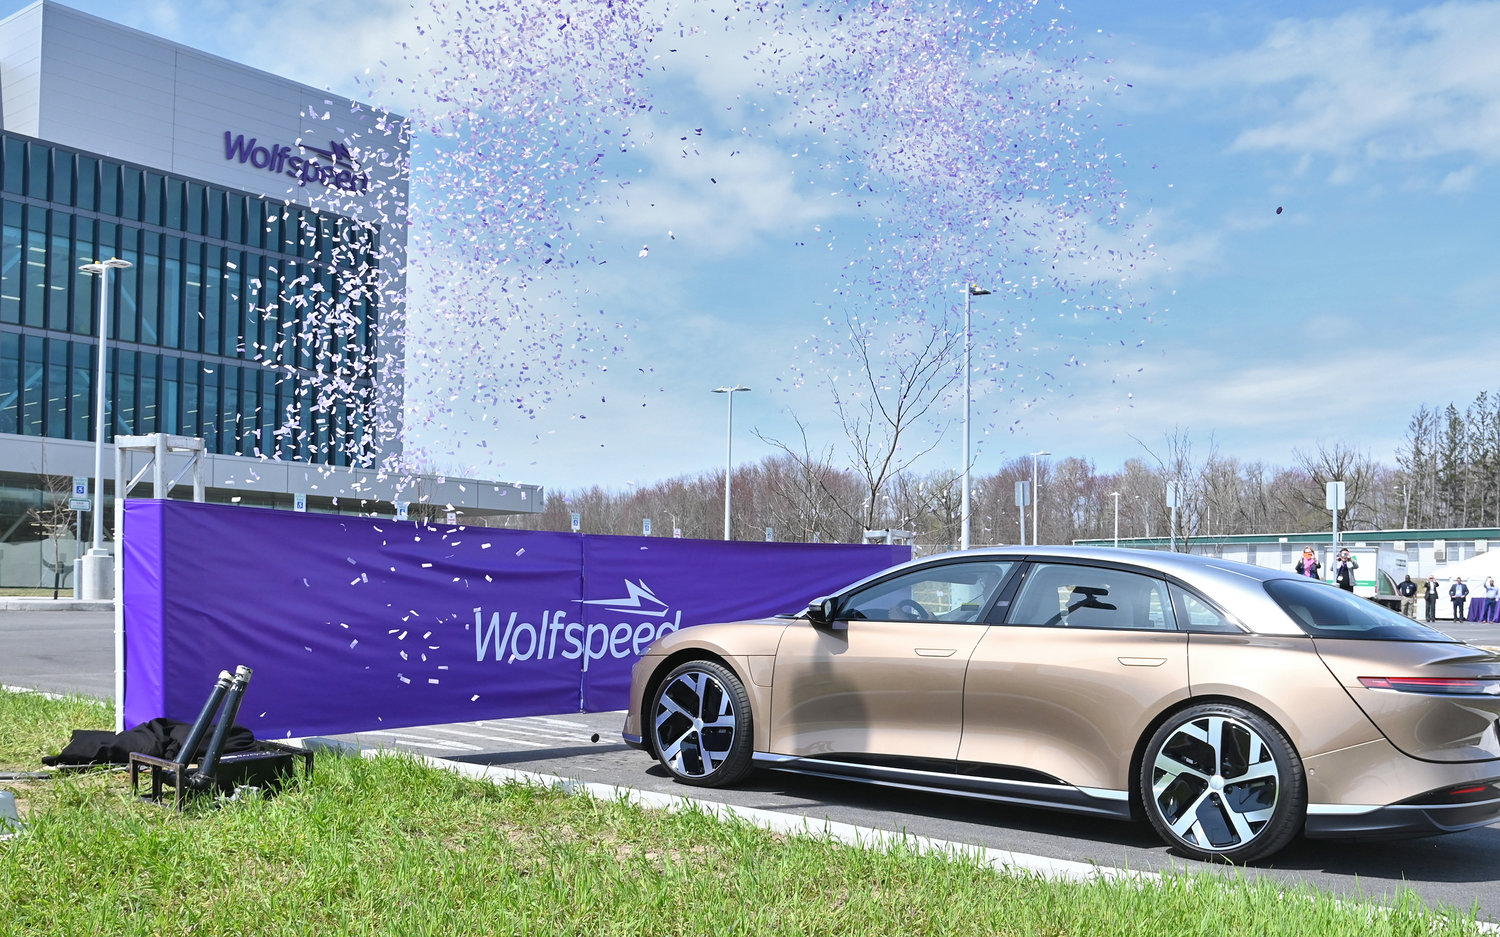 Wolfspeed celebrated their ribbon cutting ceremony on April 25 with a Lucid Motors car driving through the ribbon.